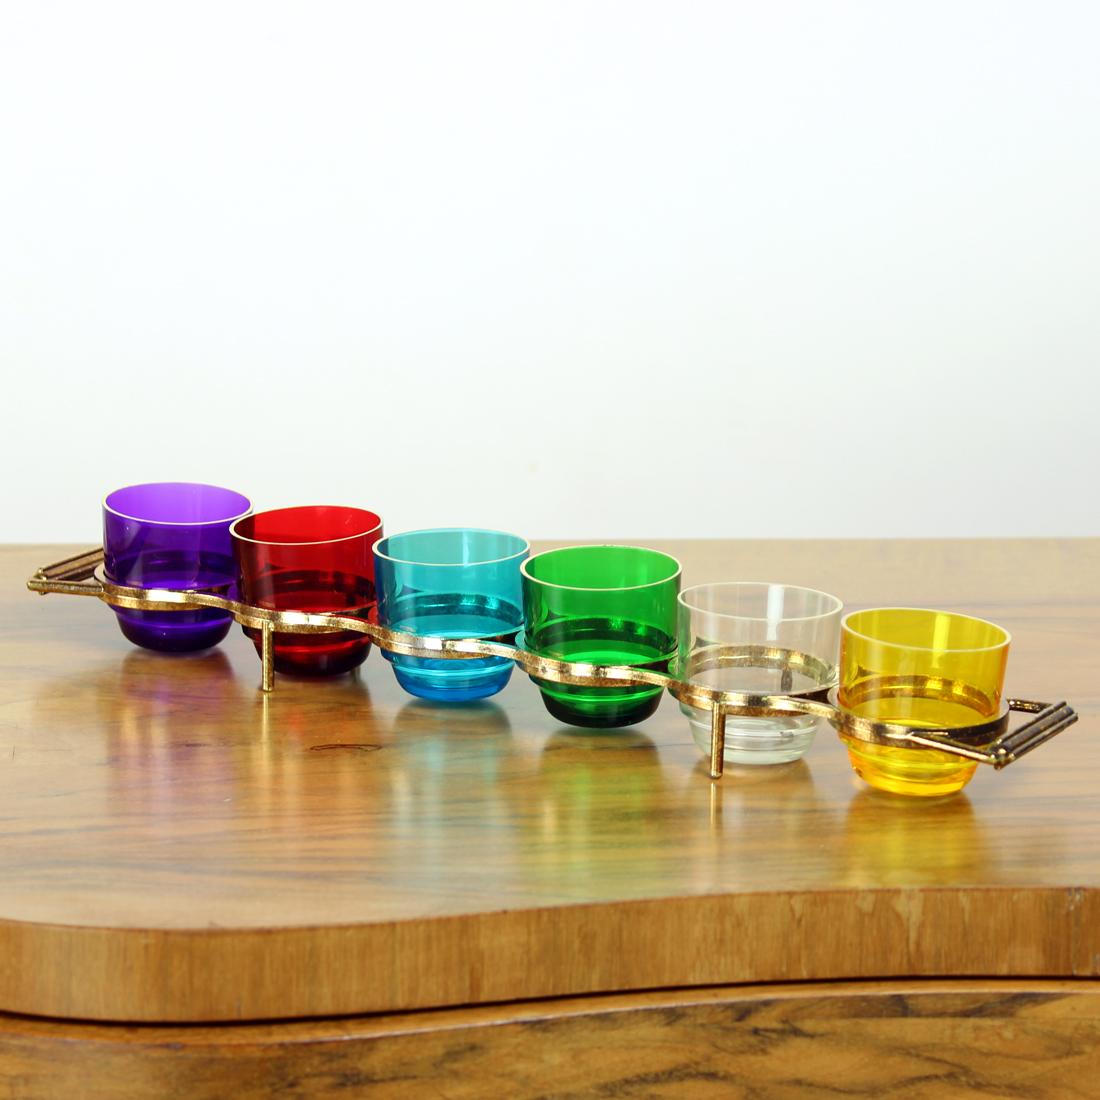 Beautiful vintage set of shots in rainbow colors in one holder. The piece is made of plastic, a very popular material in 1960s. But the condition is really nice. Apart from some age signs, there is no damage to the shots or the holder. Fully